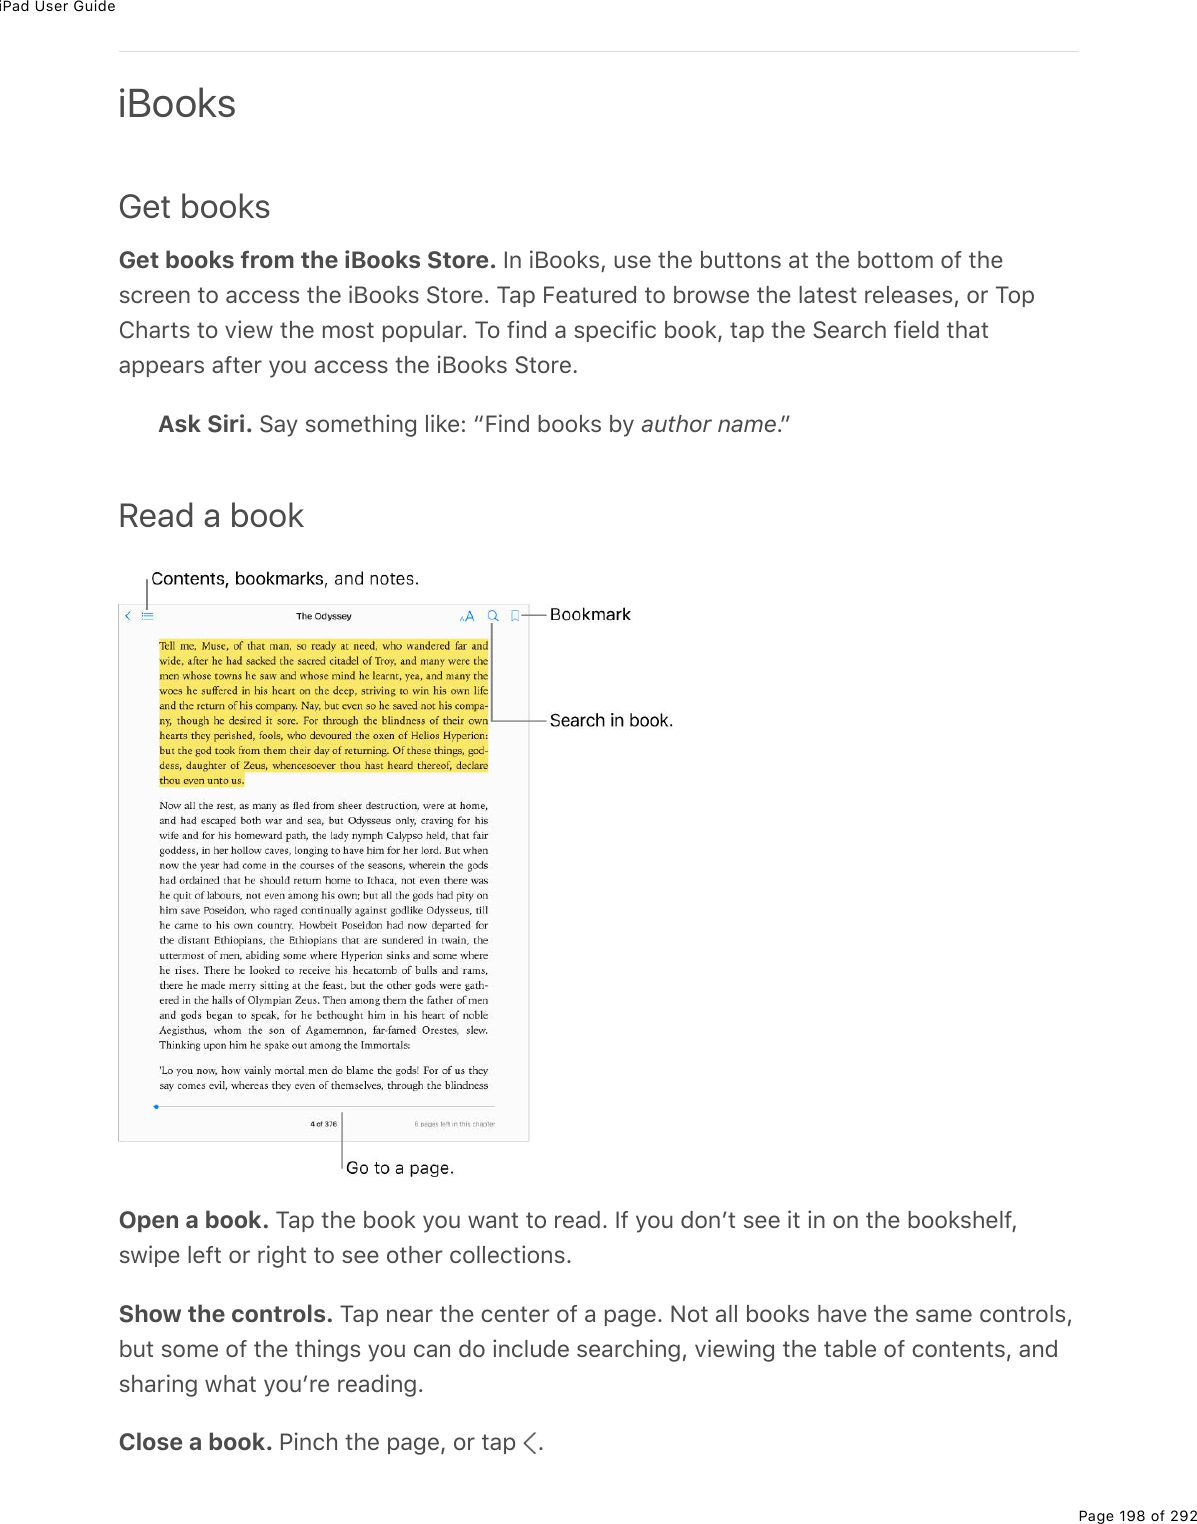 iPad User GuidePage 198 of 292iBooksGet booksGet books from the iBooks Store. S0%.J22&apos;&amp;L%&gt;&amp;(%&quot;*(%5&gt;&quot;&quot;20&amp;%#&quot;%&quot;*(%52&quot;&quot;2/%29%&quot;*(&amp;)$((0%&quot;2%#))(&amp;&amp;%&quot;*(%.J22&apos;&amp;%!&quot;2$(E%M#-%B(#&quot;&gt;$(7%&quot;2%5$21&amp;(%&quot;*(%3#&quot;(&amp;&quot;%$(3(#&amp;(&amp;L%2$%M2-4*#$&quot;&amp;%&quot;2%D.(1%&quot;*(%/2&amp;&quot;%-2-&gt;3#$E%M2%9.07%#%&amp;-().9.)%522&apos;L%&quot;#-%&quot;*(%!(#$)*%9.(37%&quot;*#&quot;#--(#$&amp;%#9&quot;($%=2&gt;%#))(&amp;&amp;%&quot;*(%.J22&apos;&amp;%!&quot;2$(EAsk Siri. !#=%&amp;2/(&quot;*.0;%3.&apos;(O%bB.07%522&apos;&amp;%5=%author nameEcRead a bookOpen a book. M#-%&quot;*(%522&apos;%=2&gt;%1#0&quot;%&quot;2%$(#7E%S9%=2&gt;%720F&quot;%&amp;((%.&quot;%.0%20%&quot;*(%522&apos;&amp;*(39L&amp;1.-(%3(9&quot;%2$%$.;*&quot;%&quot;2%&amp;((%2&quot;*($%)233()&quot;.20&amp;EShow the controls. M#-%0(#$%&quot;*(%)(0&quot;($%29%#%-#;(E%C2&quot;%#33%522&apos;&amp;%*#D(%&quot;*(%&amp;#/(%)20&quot;$23&amp;L5&gt;&quot;%&amp;2/(%29%&quot;*(%&quot;*.0;&amp;%=2&gt;%)#0%72%.0)3&gt;7(%&amp;(#$)*.0;L%D.(1.0;%&quot;*(%&quot;#53(%29%)20&quot;(0&quot;&amp;L%#07&amp;*#$.0;%1*#&quot;%=2&gt;F$(%$(#7.0;EClose a book. @.0)*%&quot;*(%-#;(L%2$%&quot;#-% E